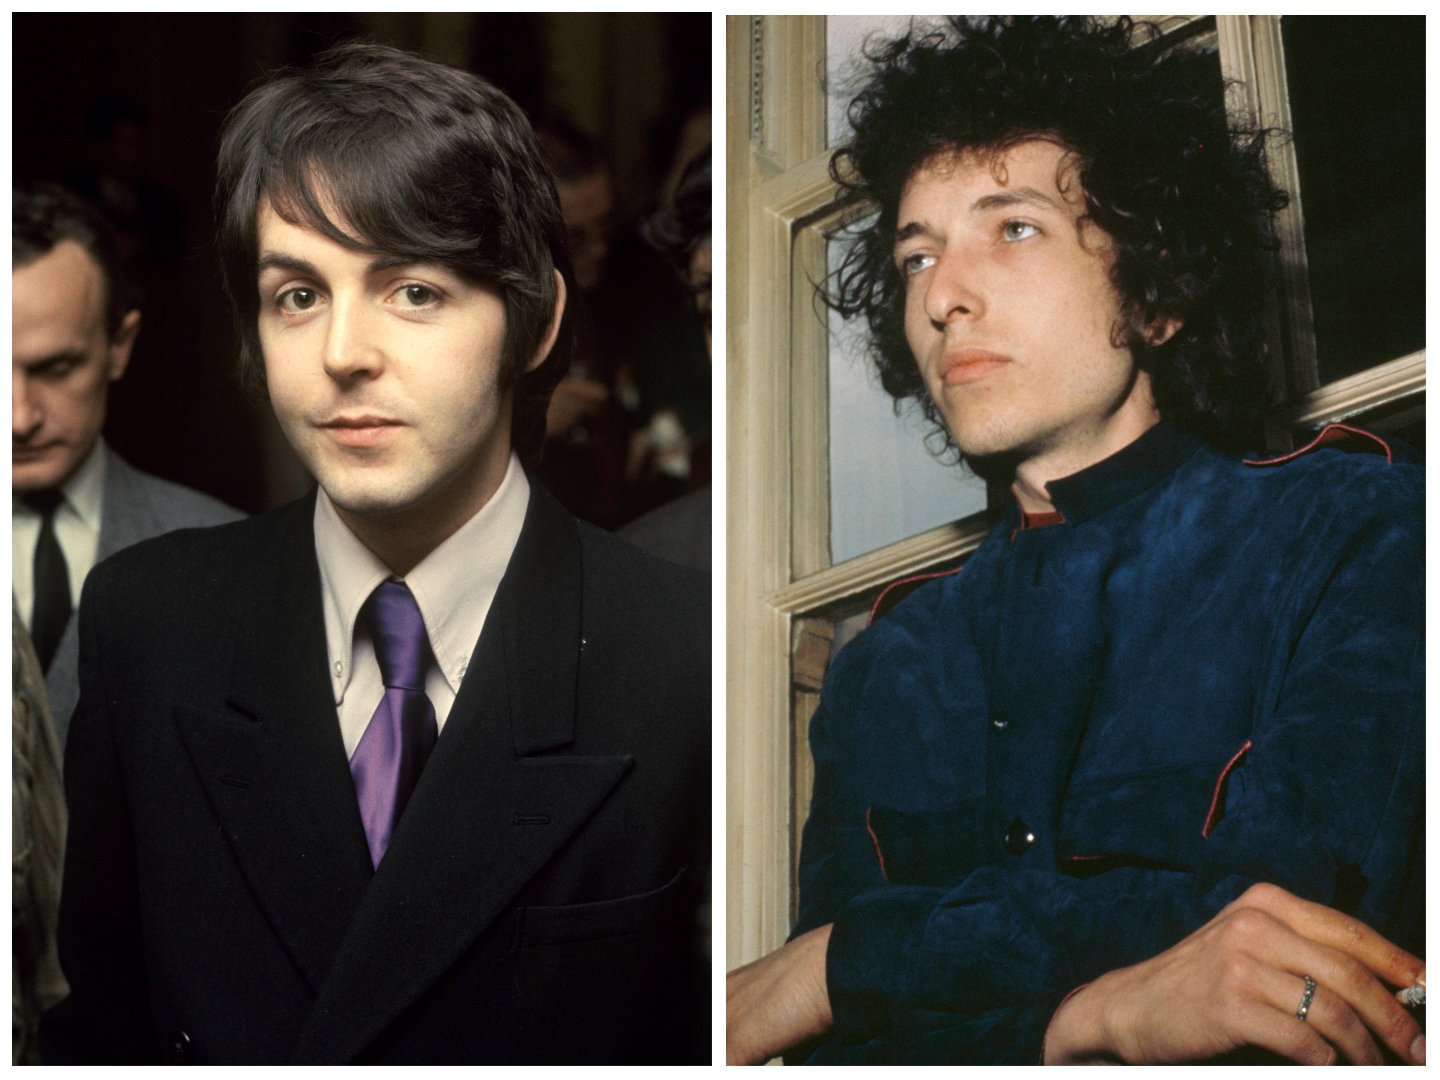 Paul McCartney wears a suit with a purple tie. Bob Dylan stands in front of a window.